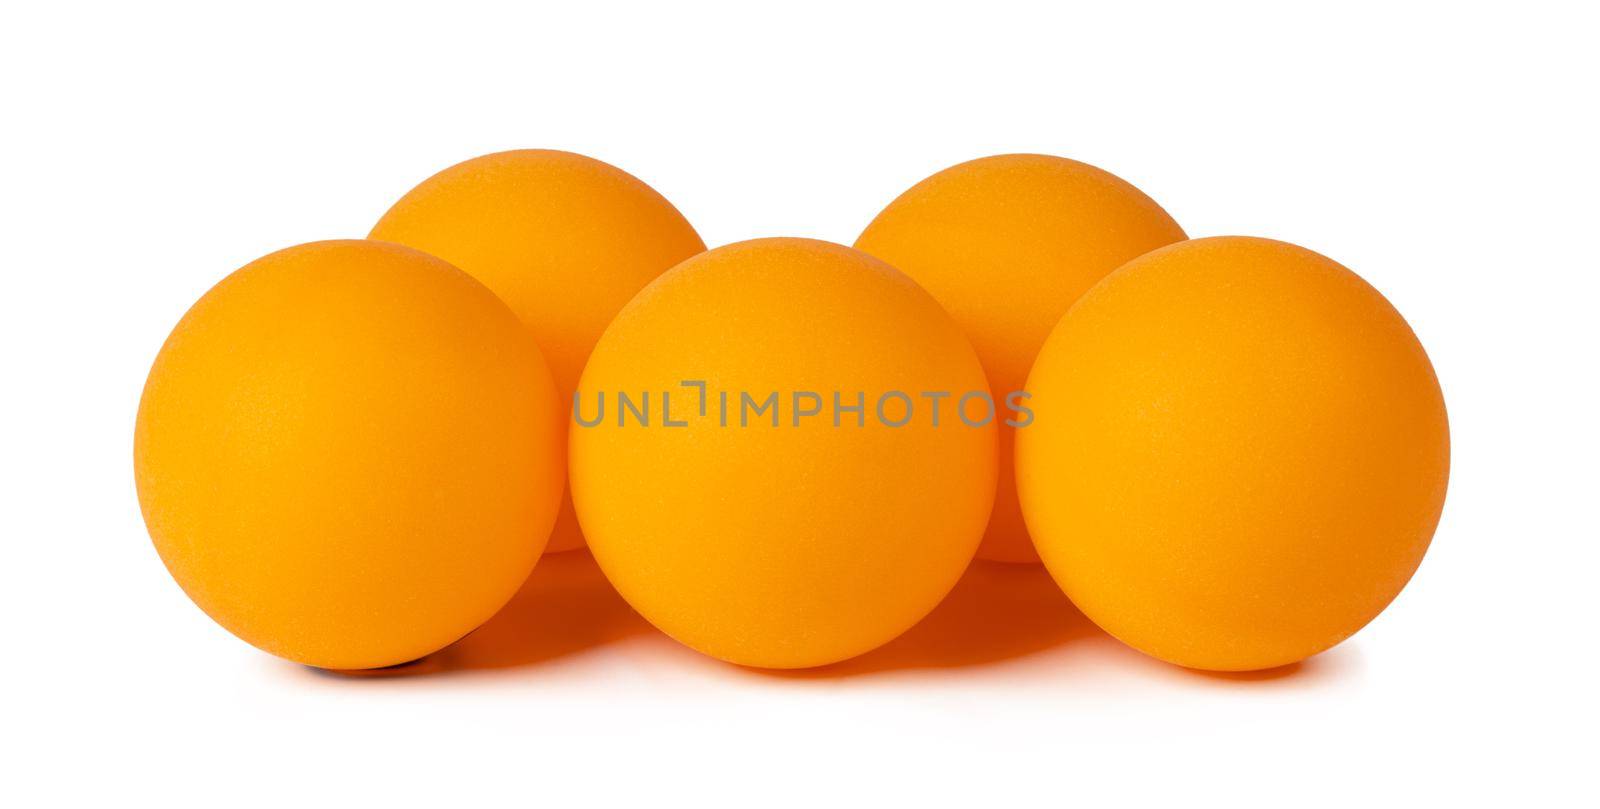 Table tennis balls isolated on white background by Fabrikasimf